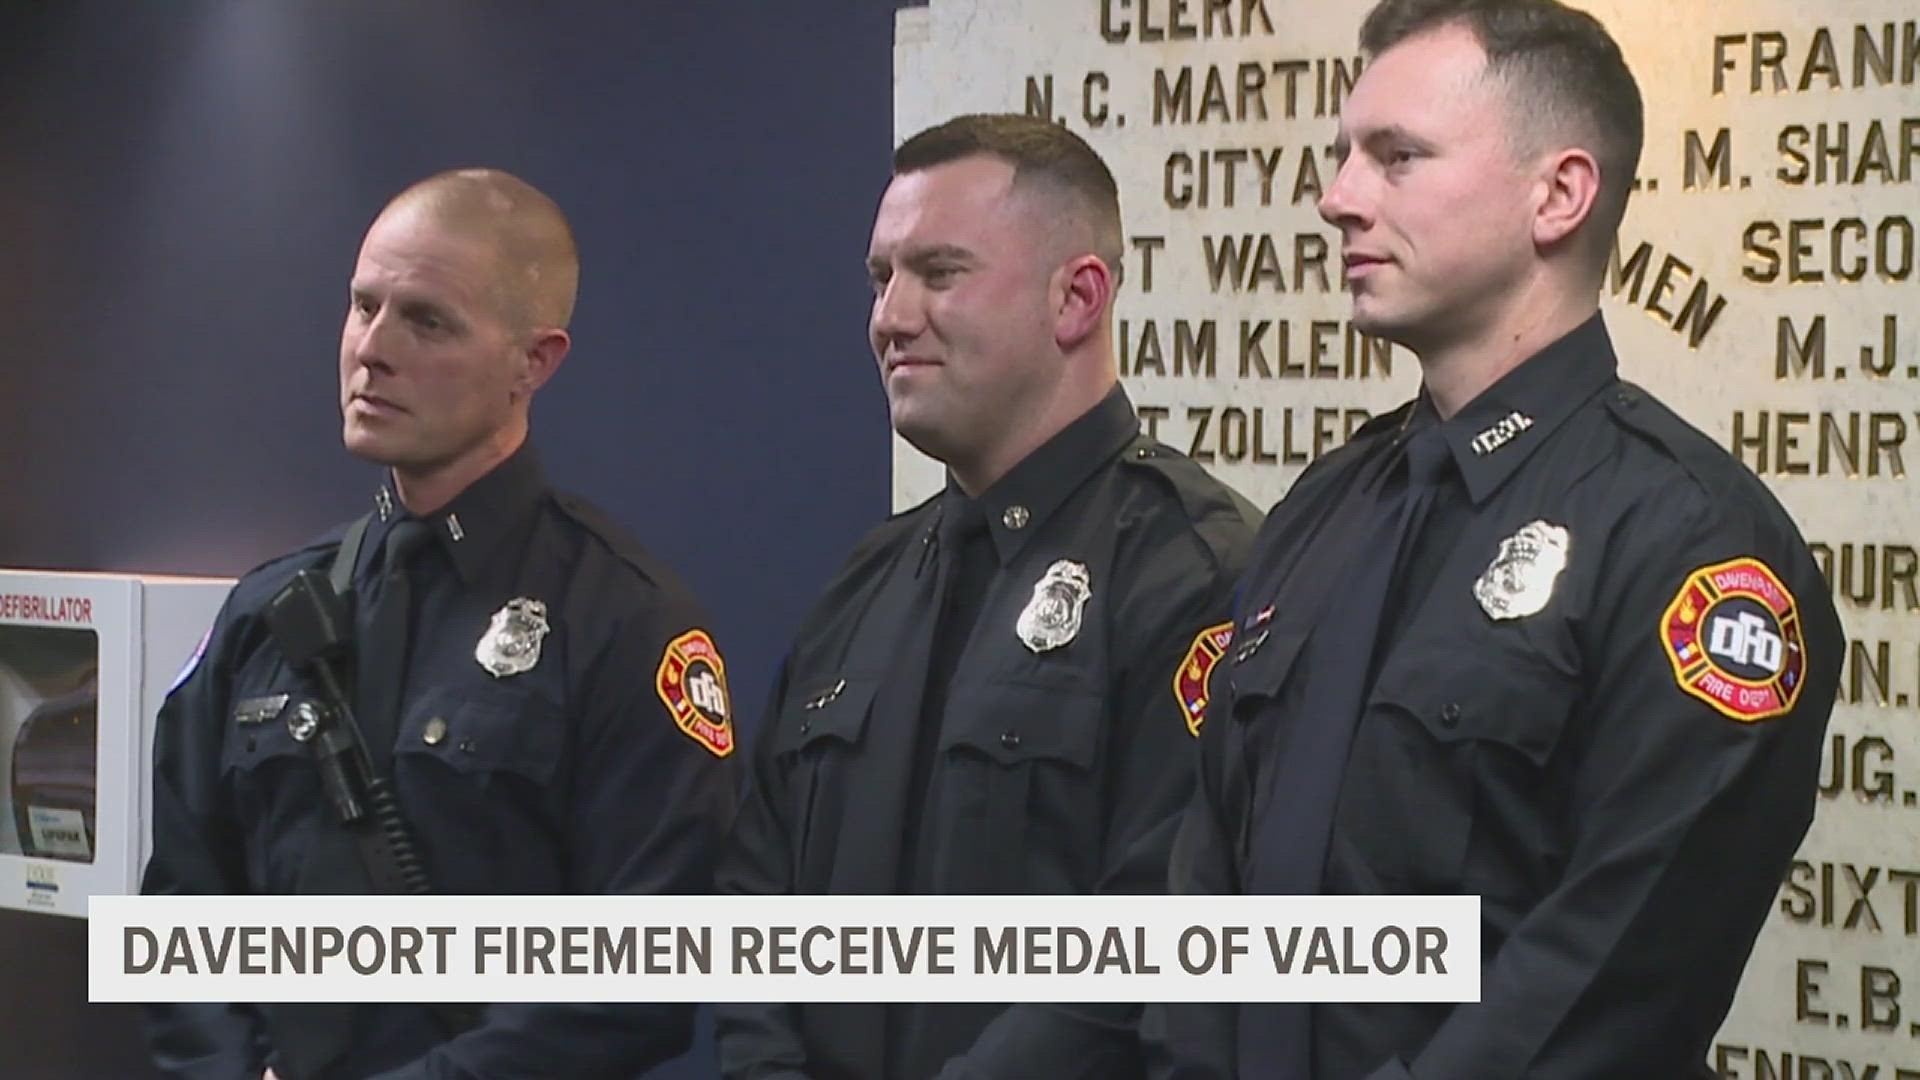 Lieutenant Jeff Pilgrim and Firefighters Cory 
Schaeckenbach and Trevor Dodson received the award, honoring their efforts to rescue people in subzero temperatures.